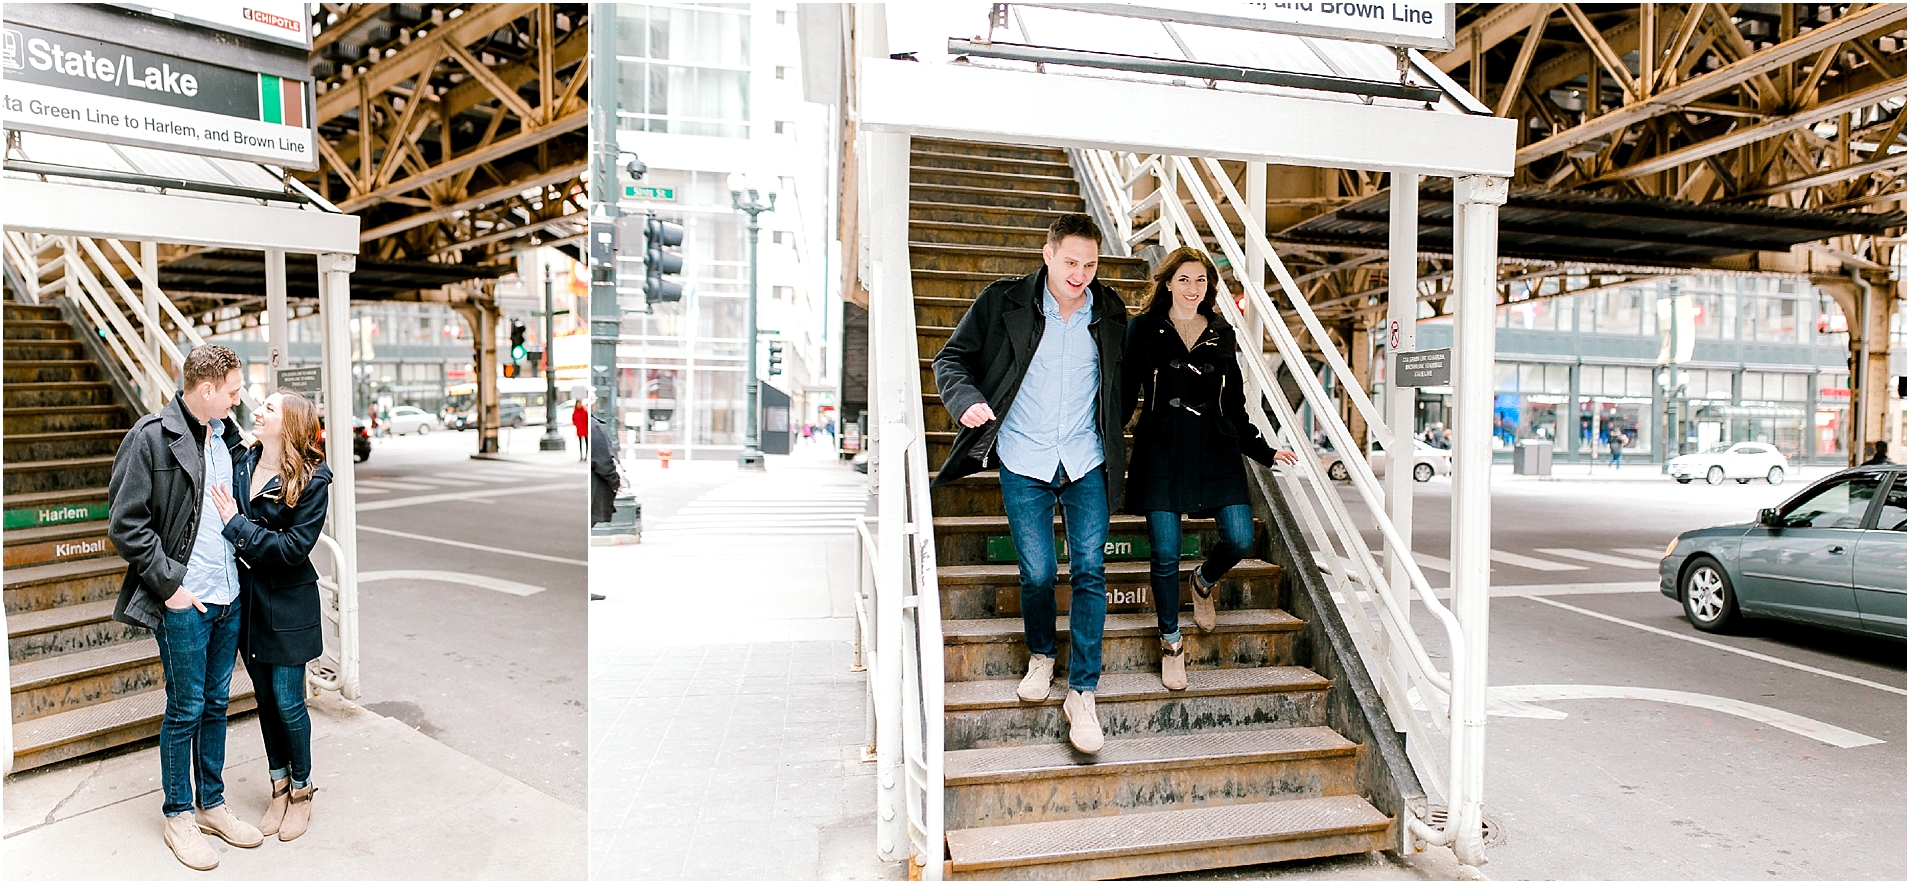 fun engagement session in a Metra station in Chicago 